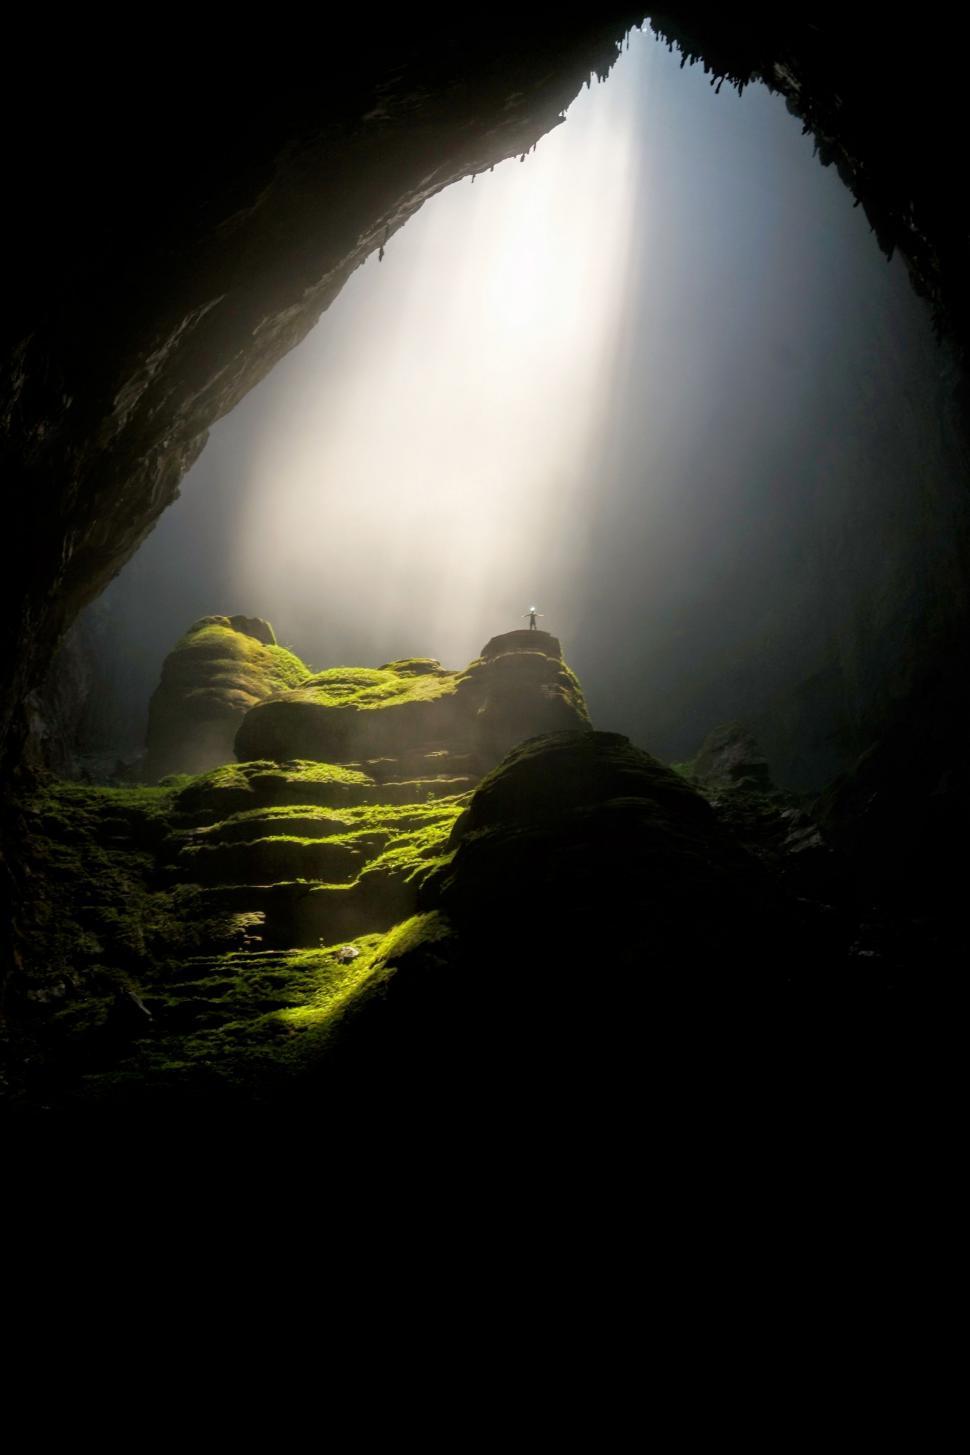 Free Image of Lush Green Grass-Filled Cave 